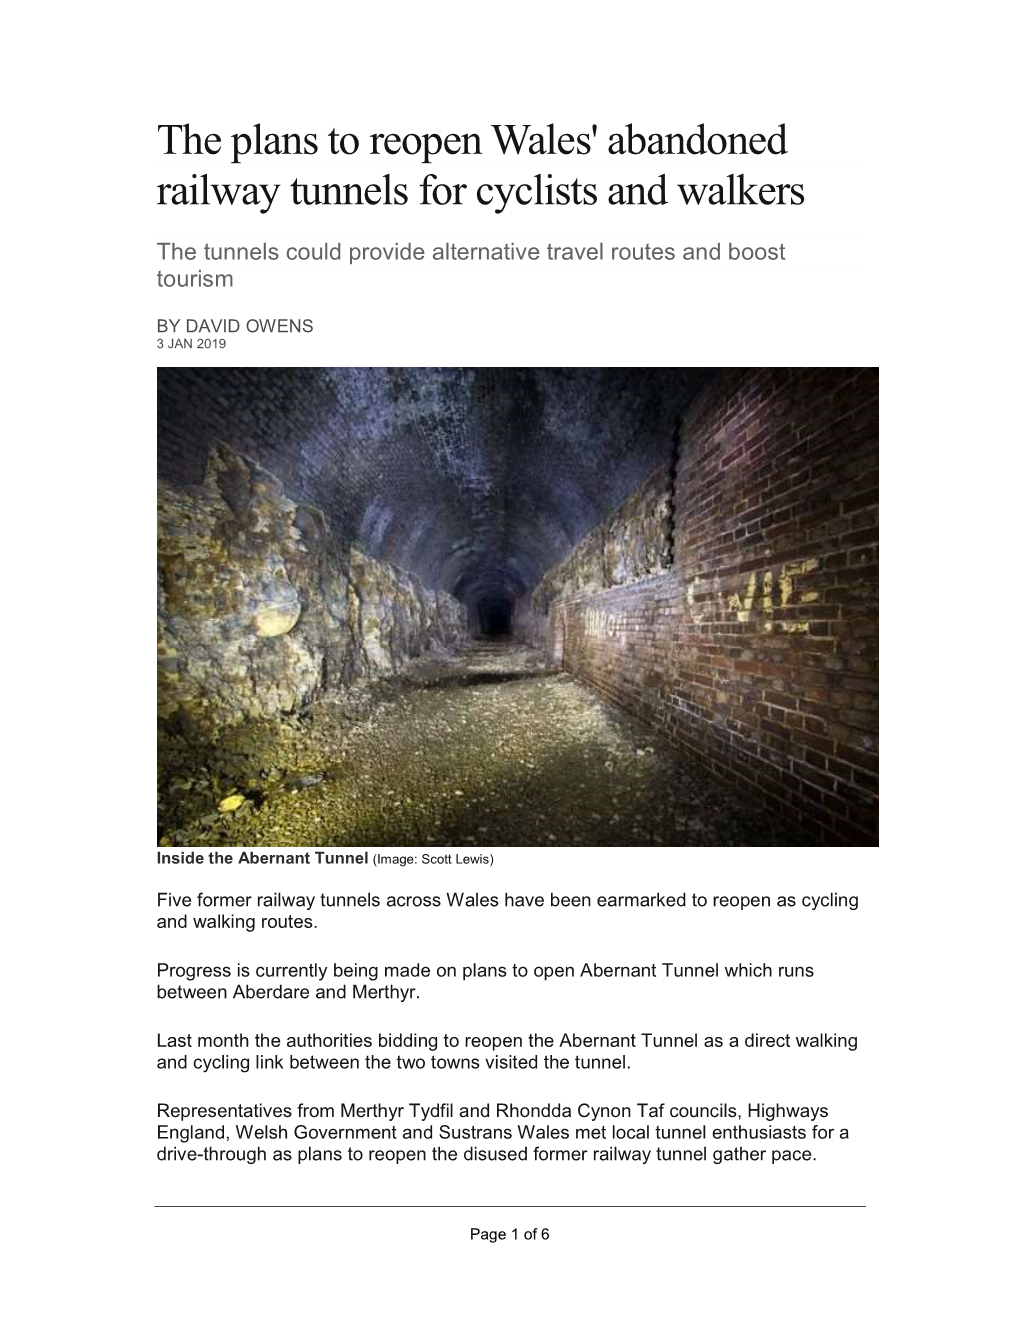 The Plans to Reopen Wales' Abandoned Railway Tunnels for Cyclists and Walkers